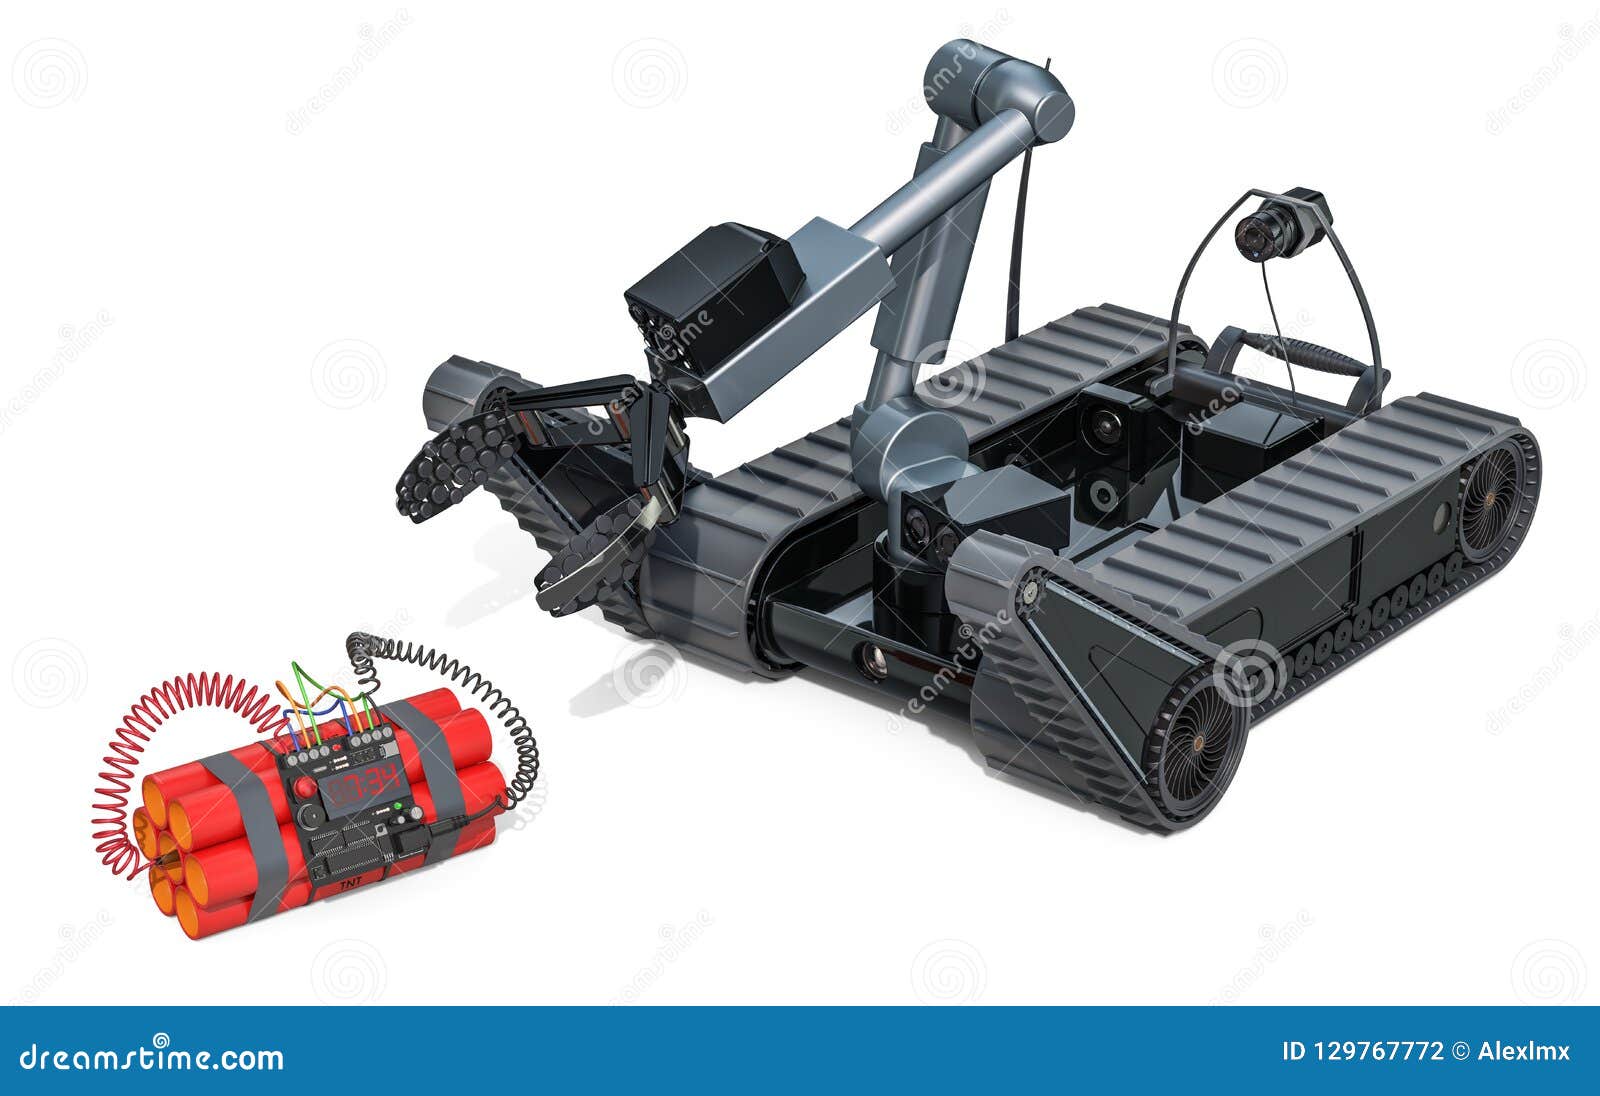 Bomb Disposal Robot with Bomb, 3D Rendering Stock Illustration Illustration of automation, robotic: 129767772